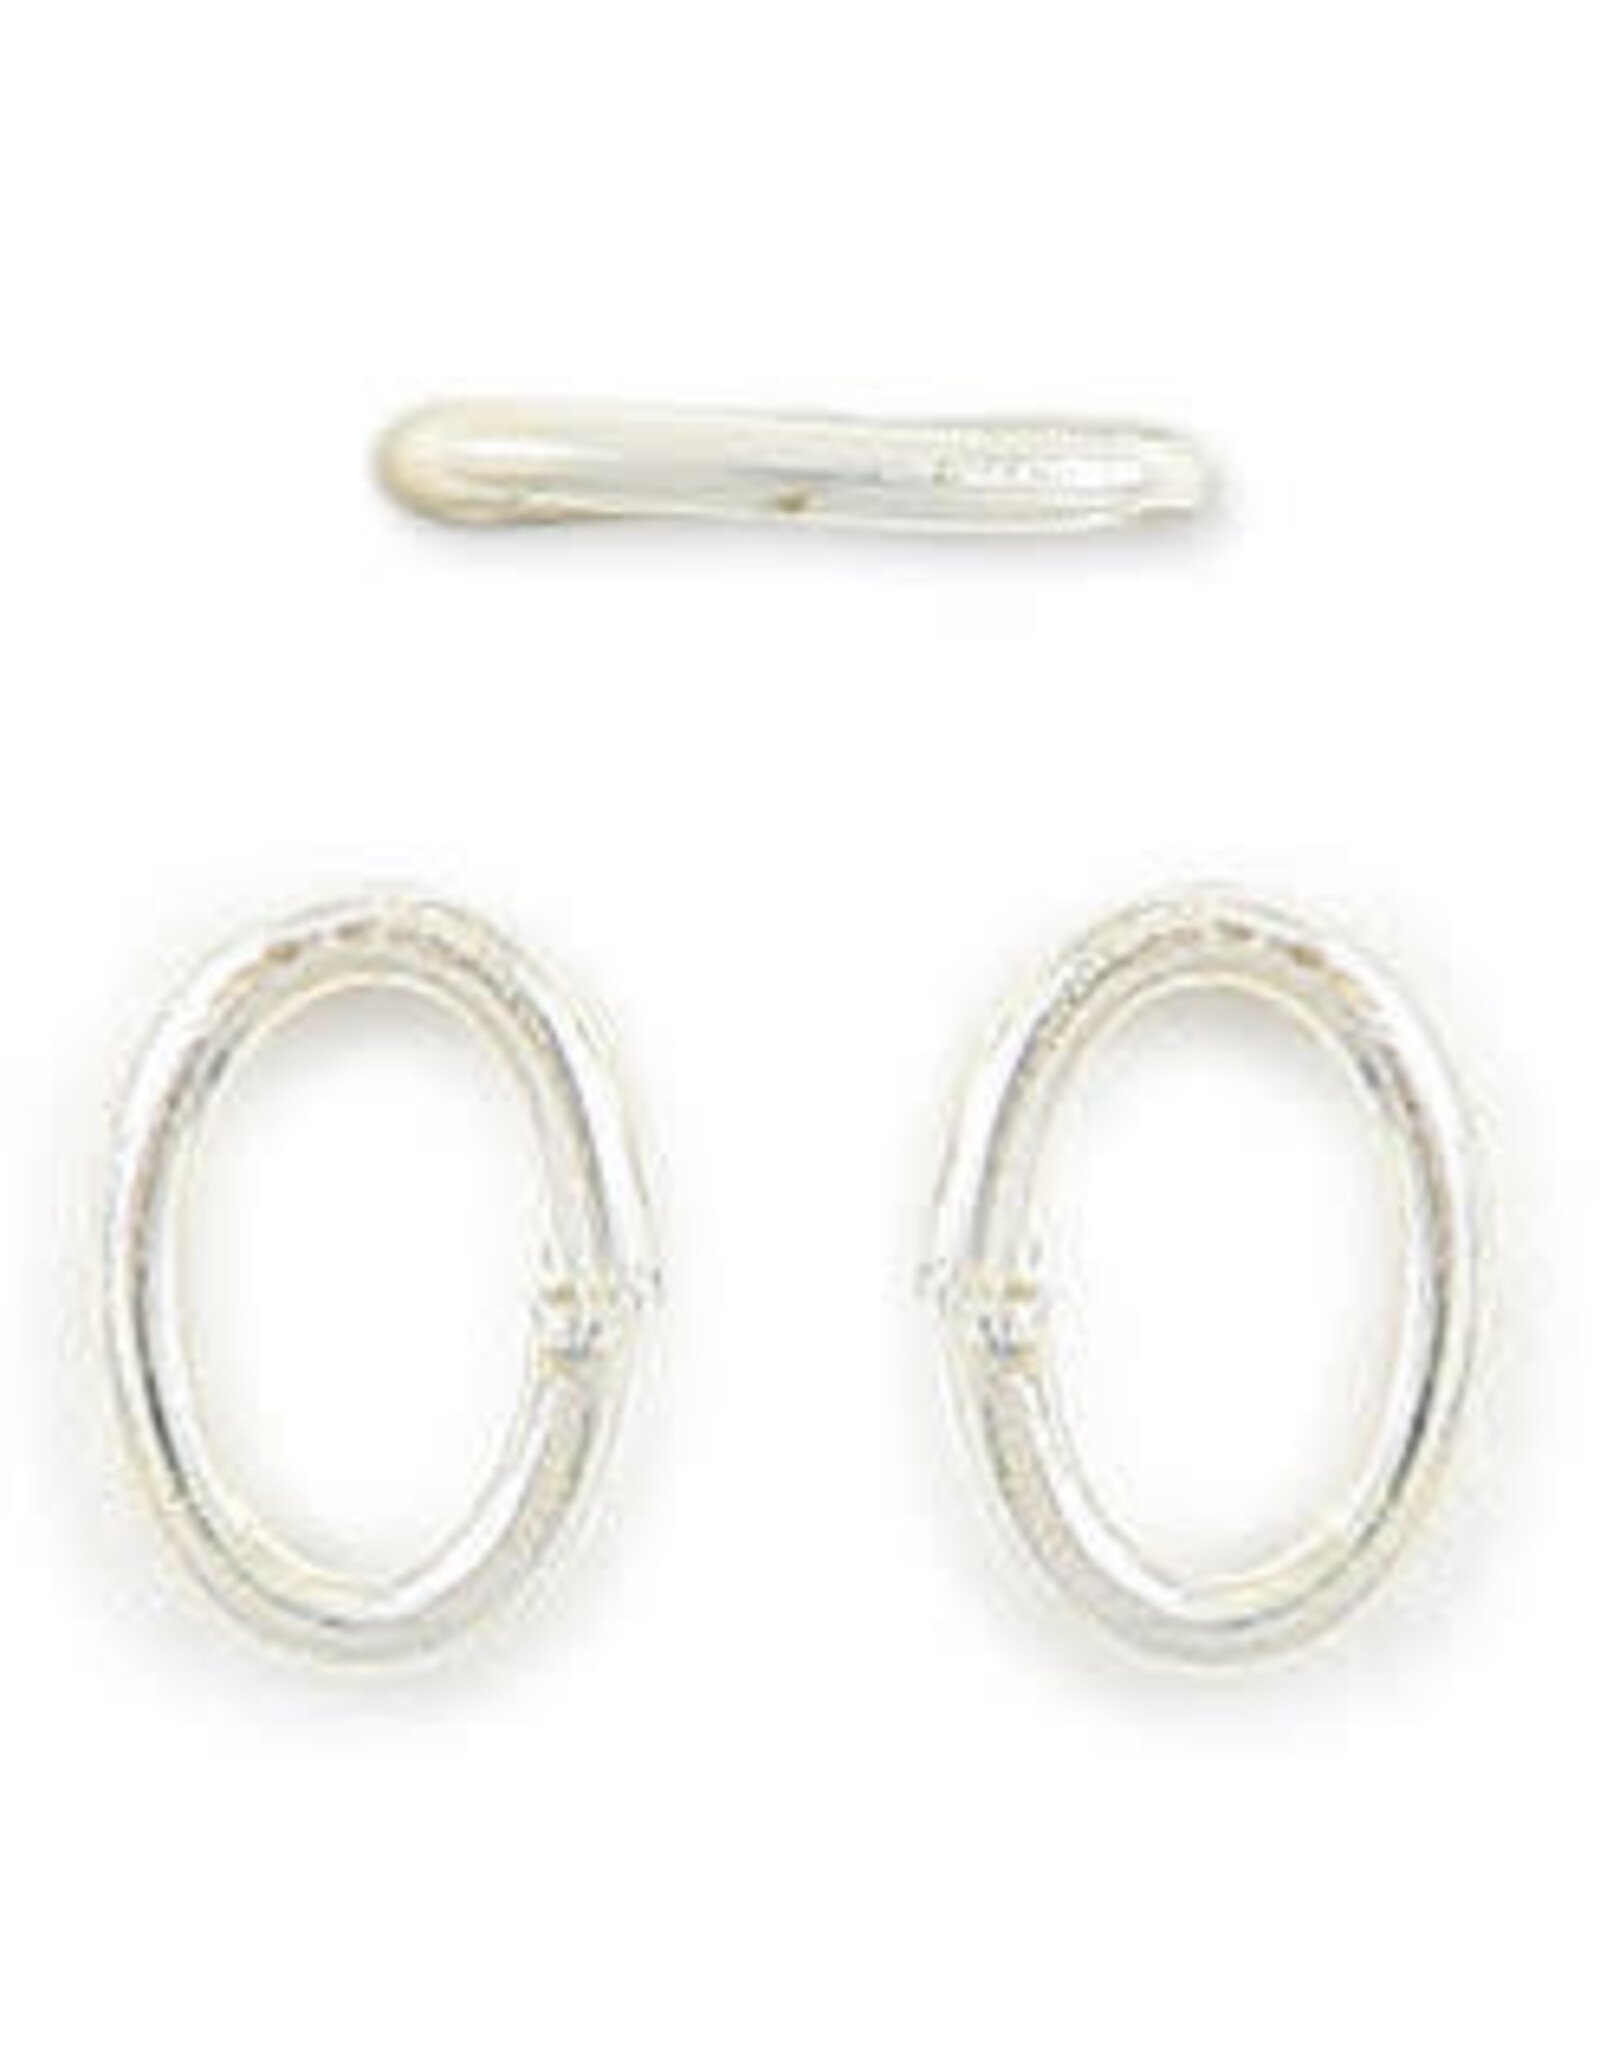 Jump Ring 4x6mm Oval 20g Silver x100 NF